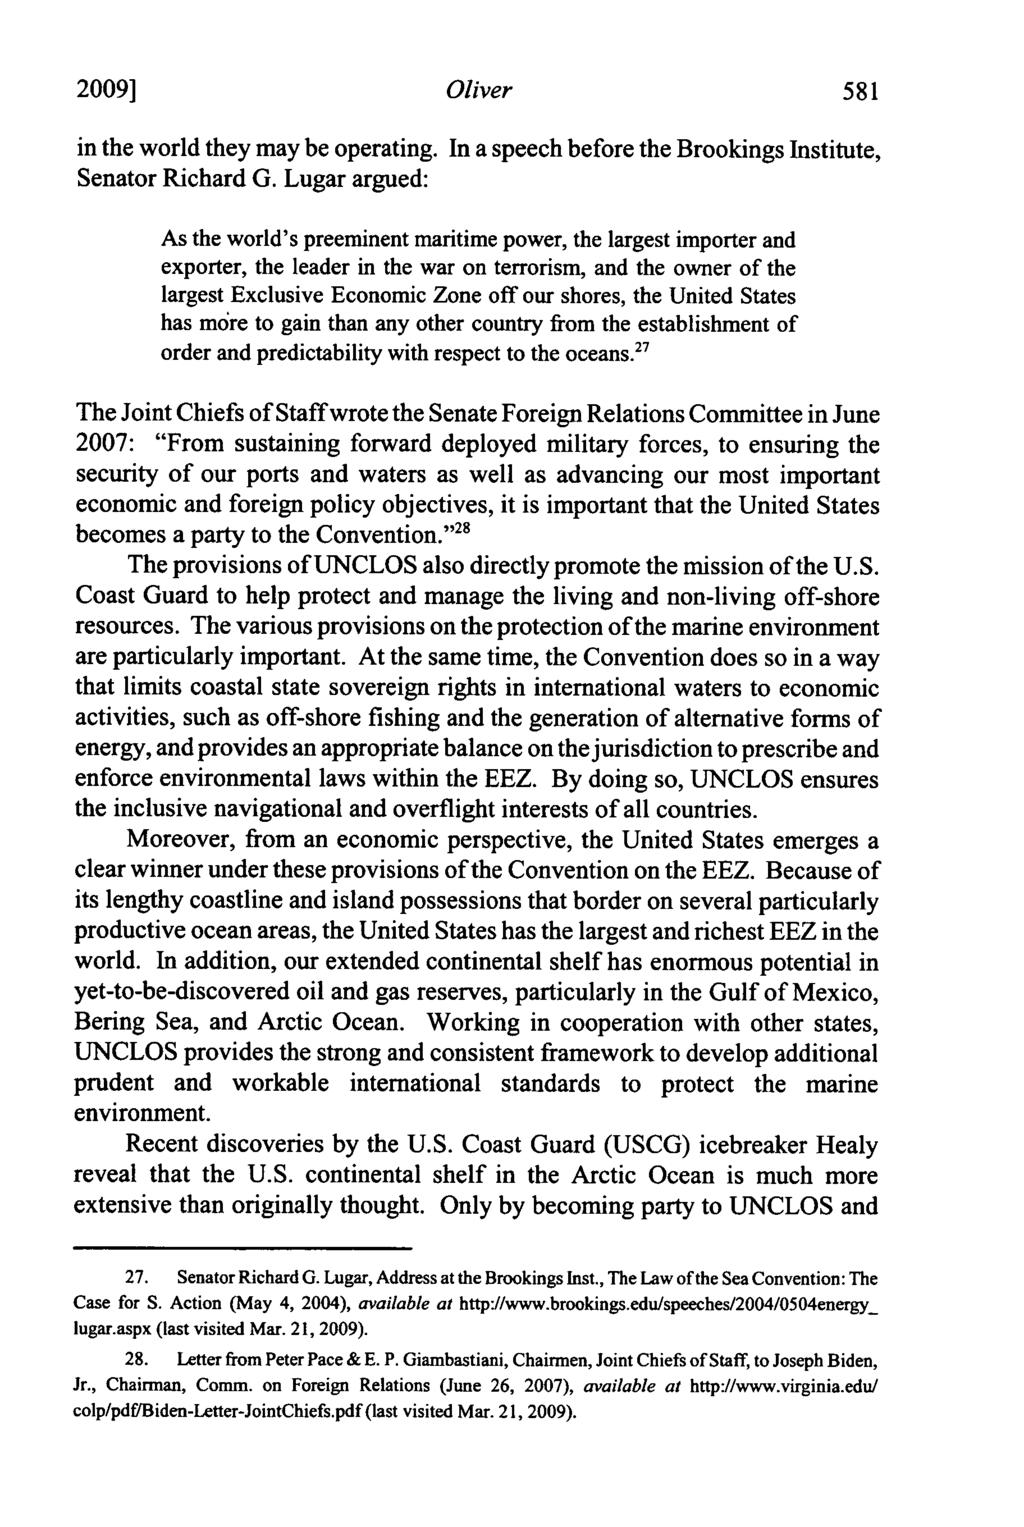 2009] Oliver in the world they may be operating. In a speech before the Brookings Institute, Senator Richard G.